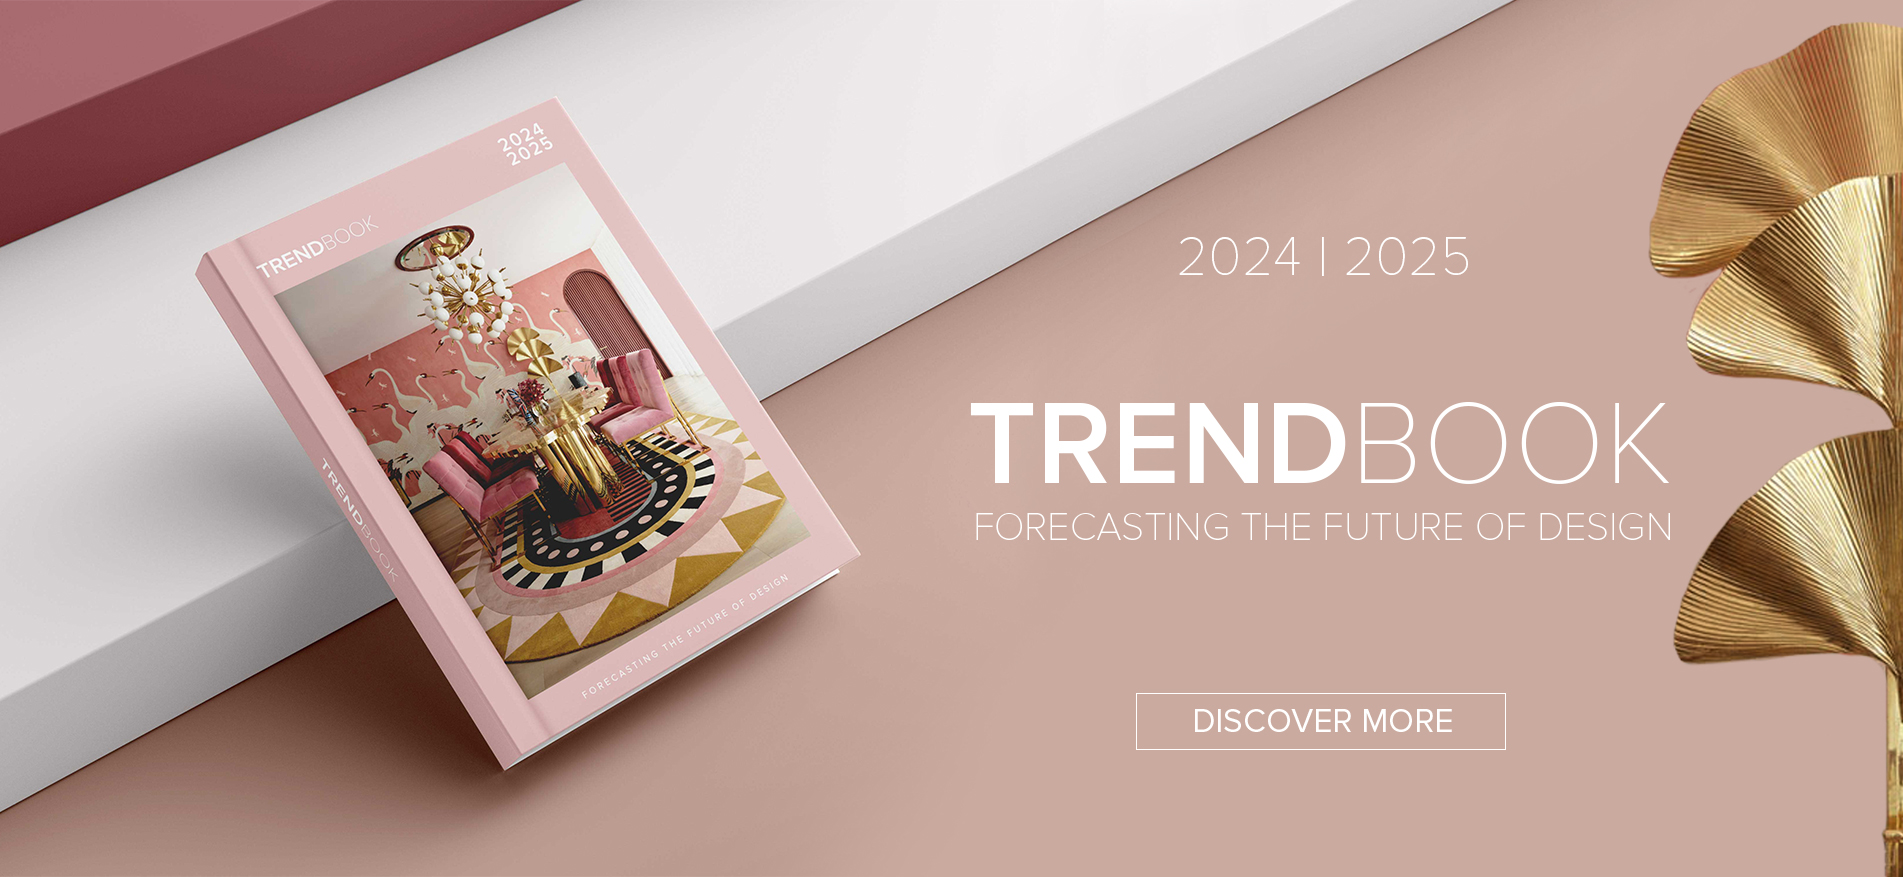 New Trend Book 2024/25